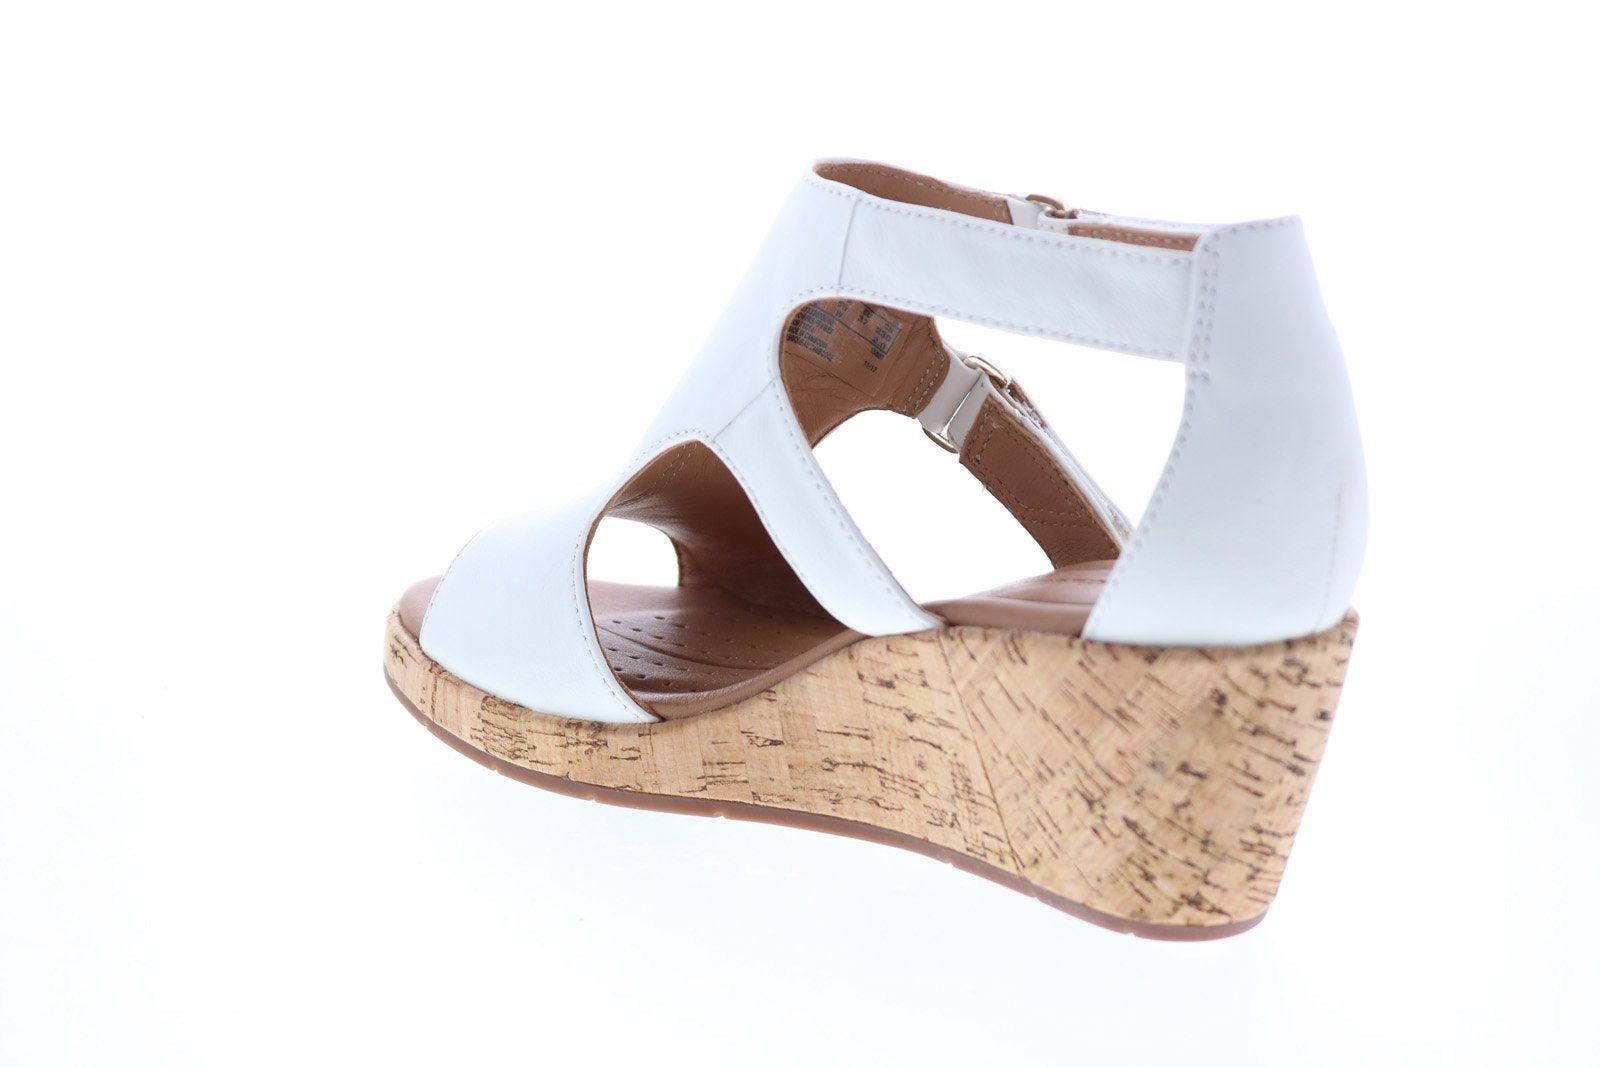 Clarks Un Plaza Strap Womens White Wide Leather Wedges Heels - Shoes